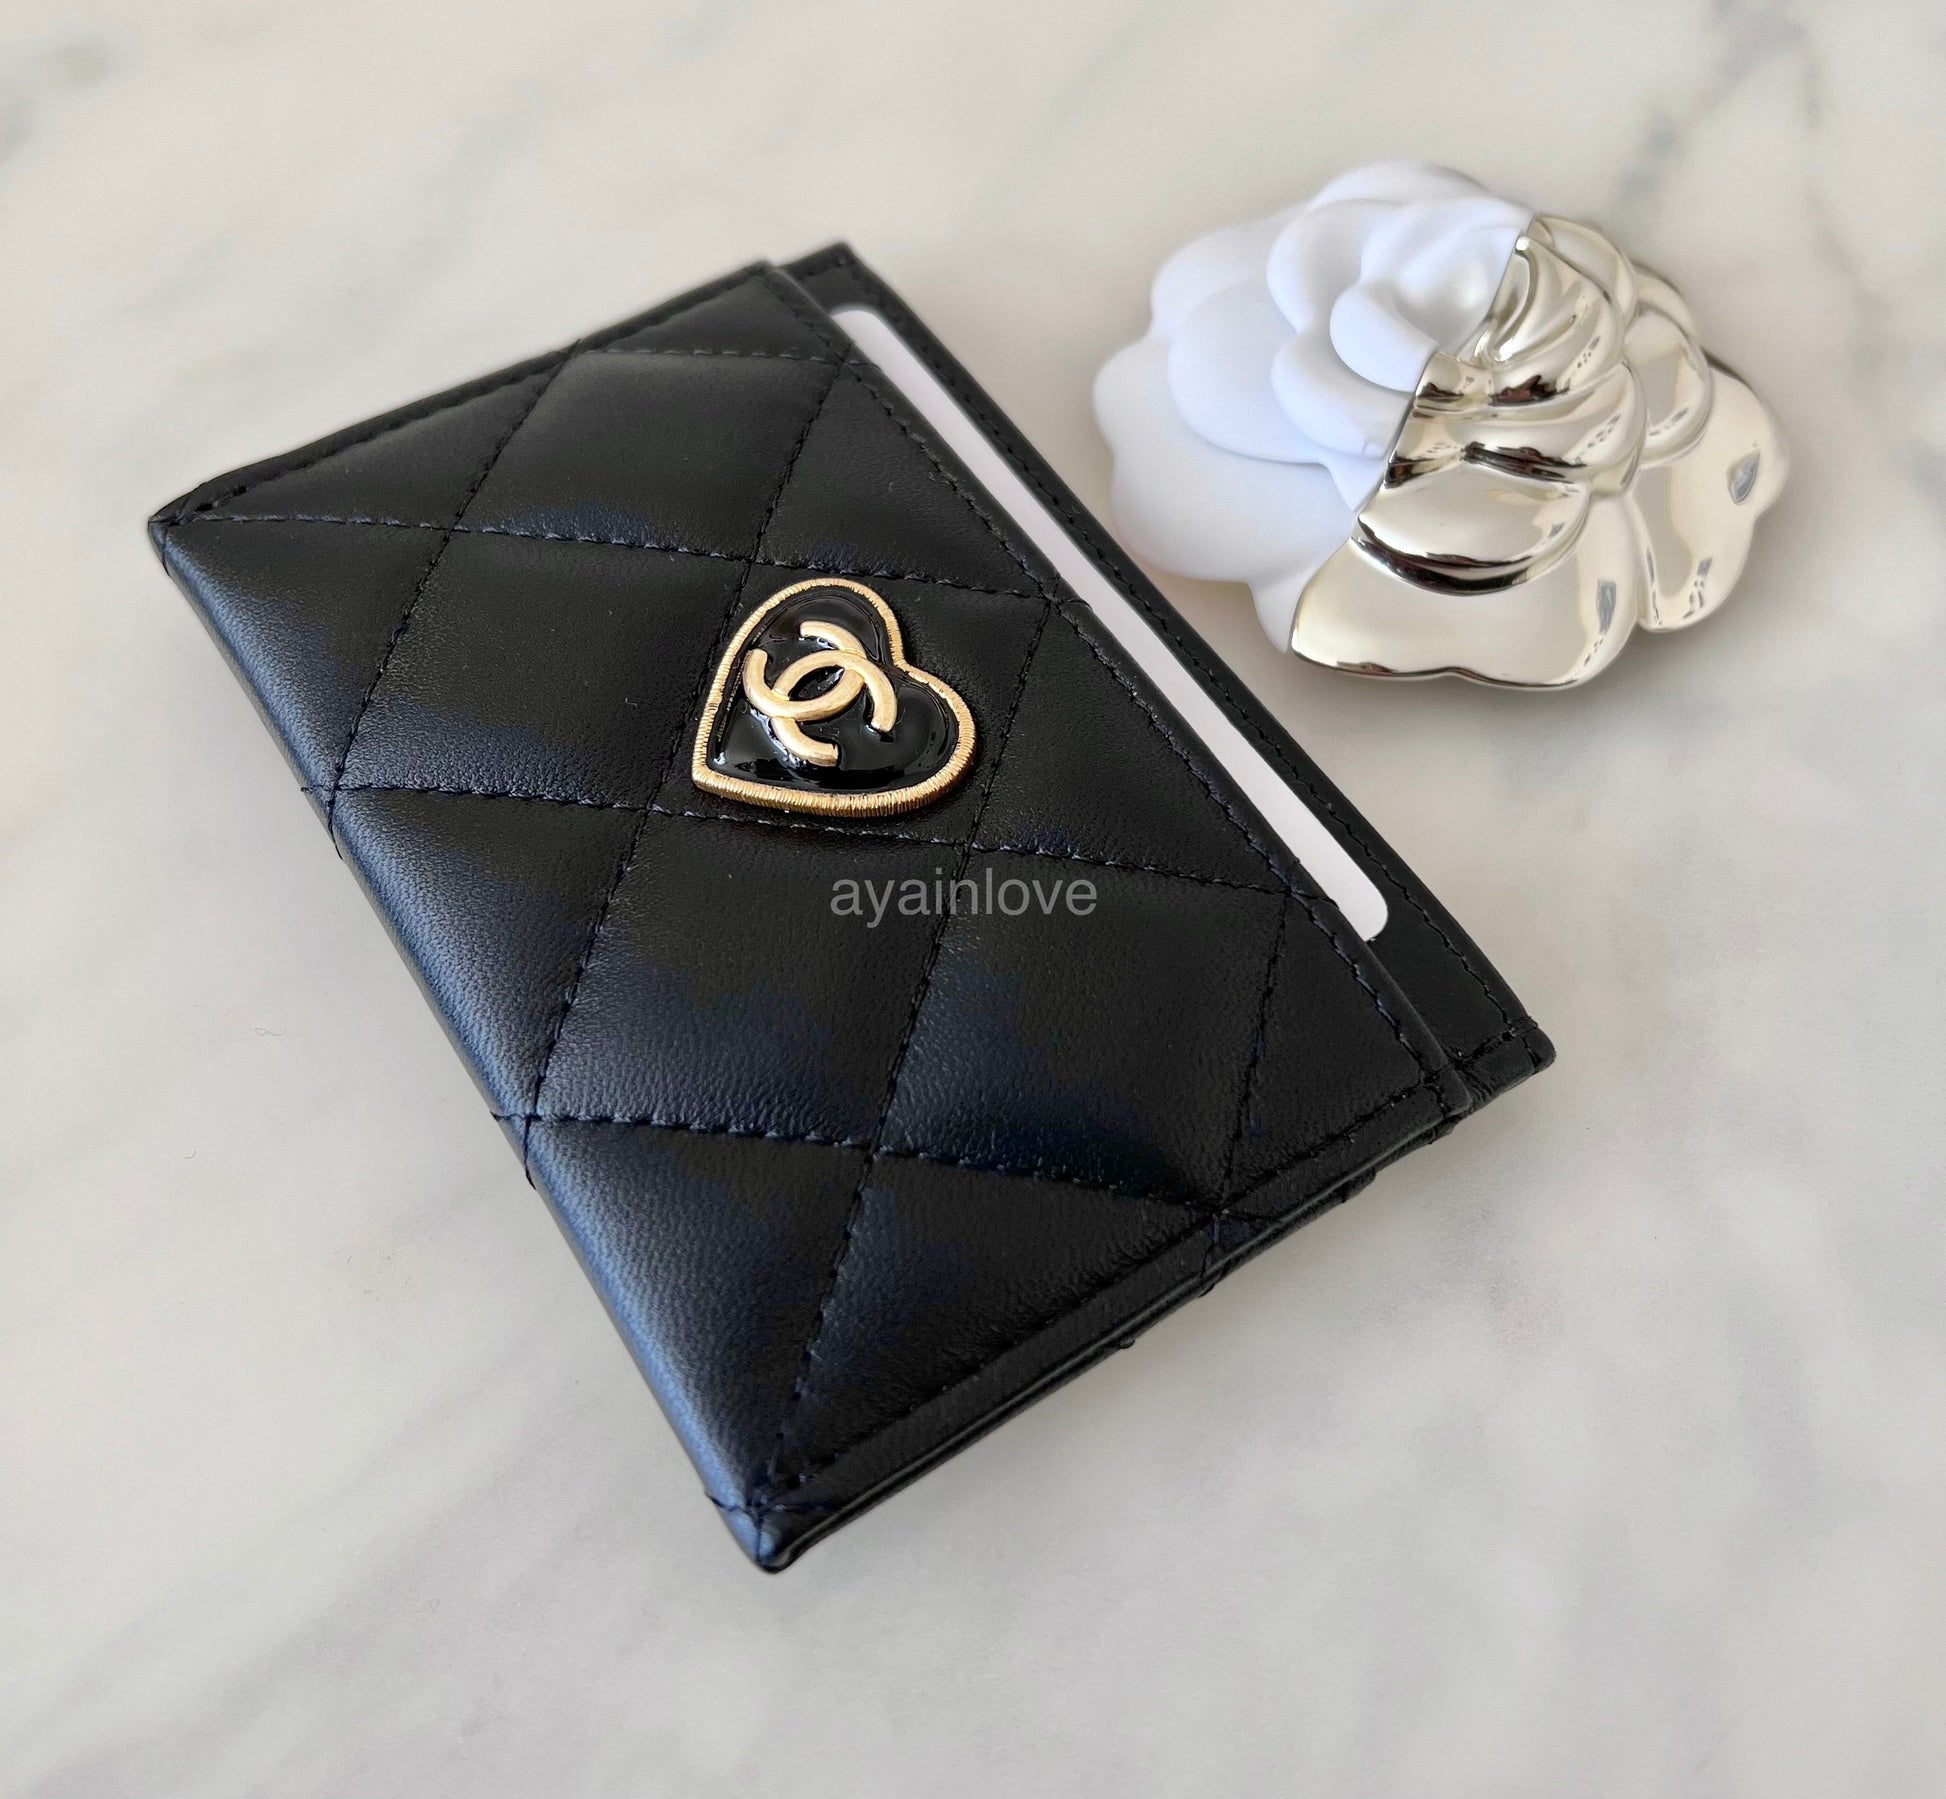 Chanel 19 Wallet on Chain, Pink Lambskin Leather, Preowned in Box